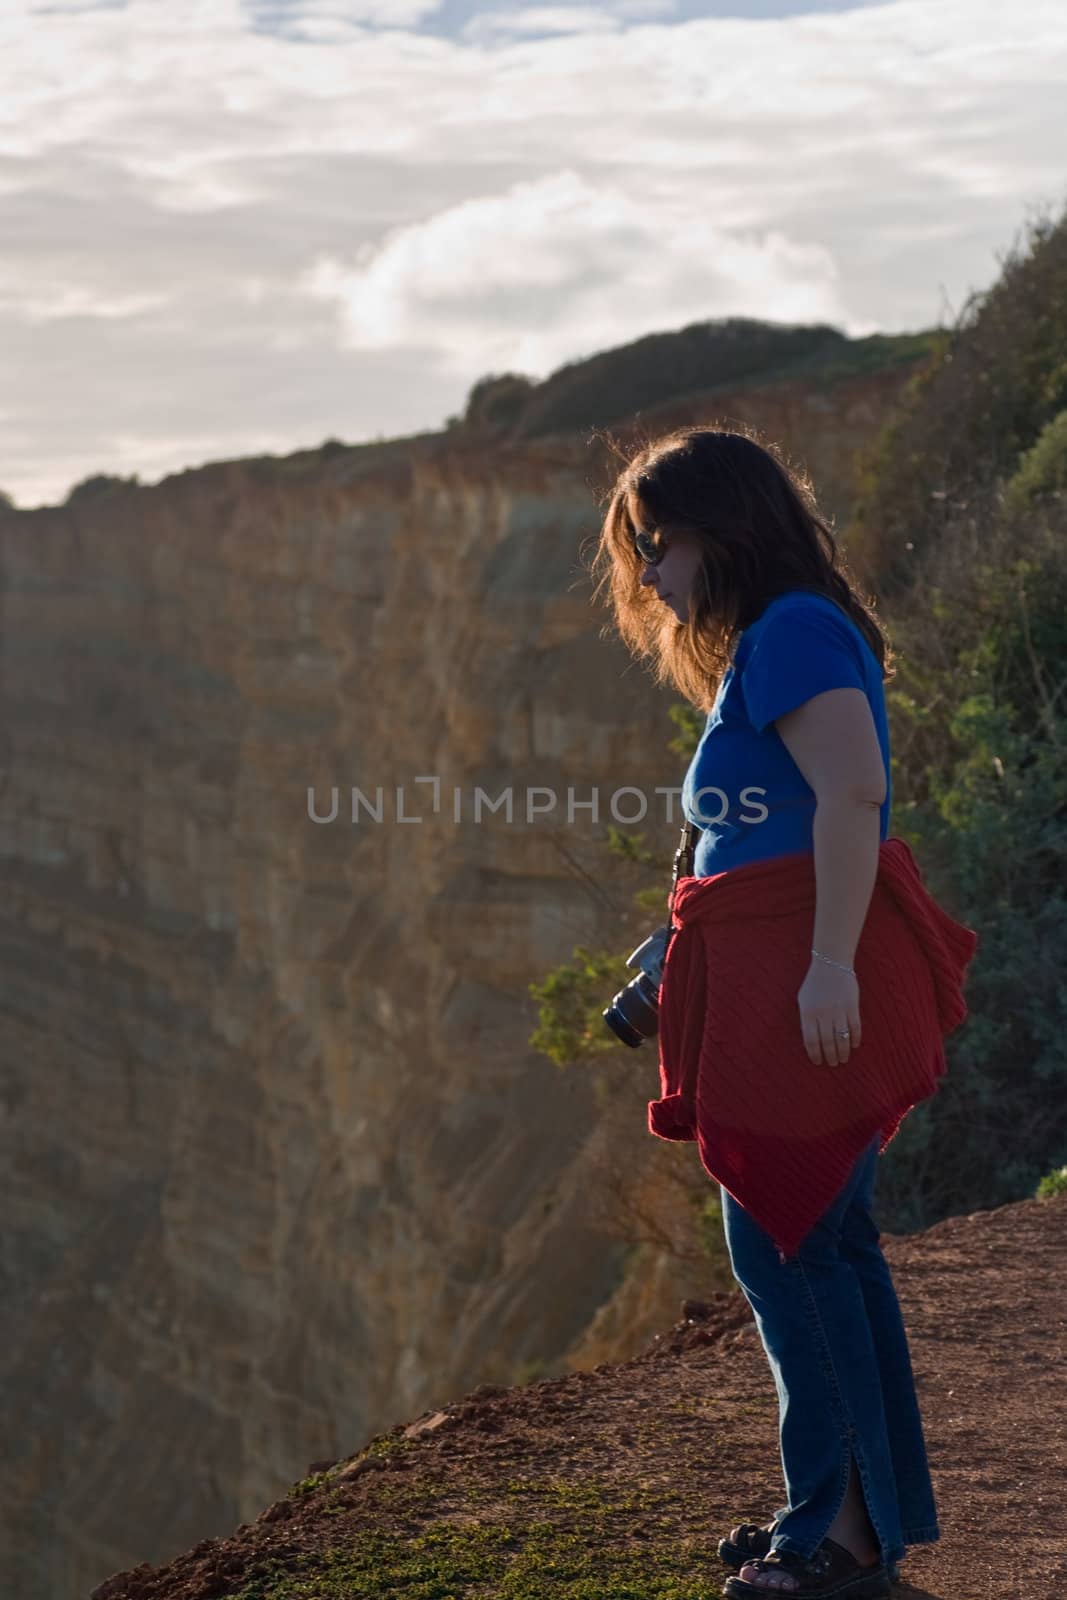 A woman with a camera at the edge of a cliff, looking out, with more cliffs in the background.  Near Lagos, Portugal.